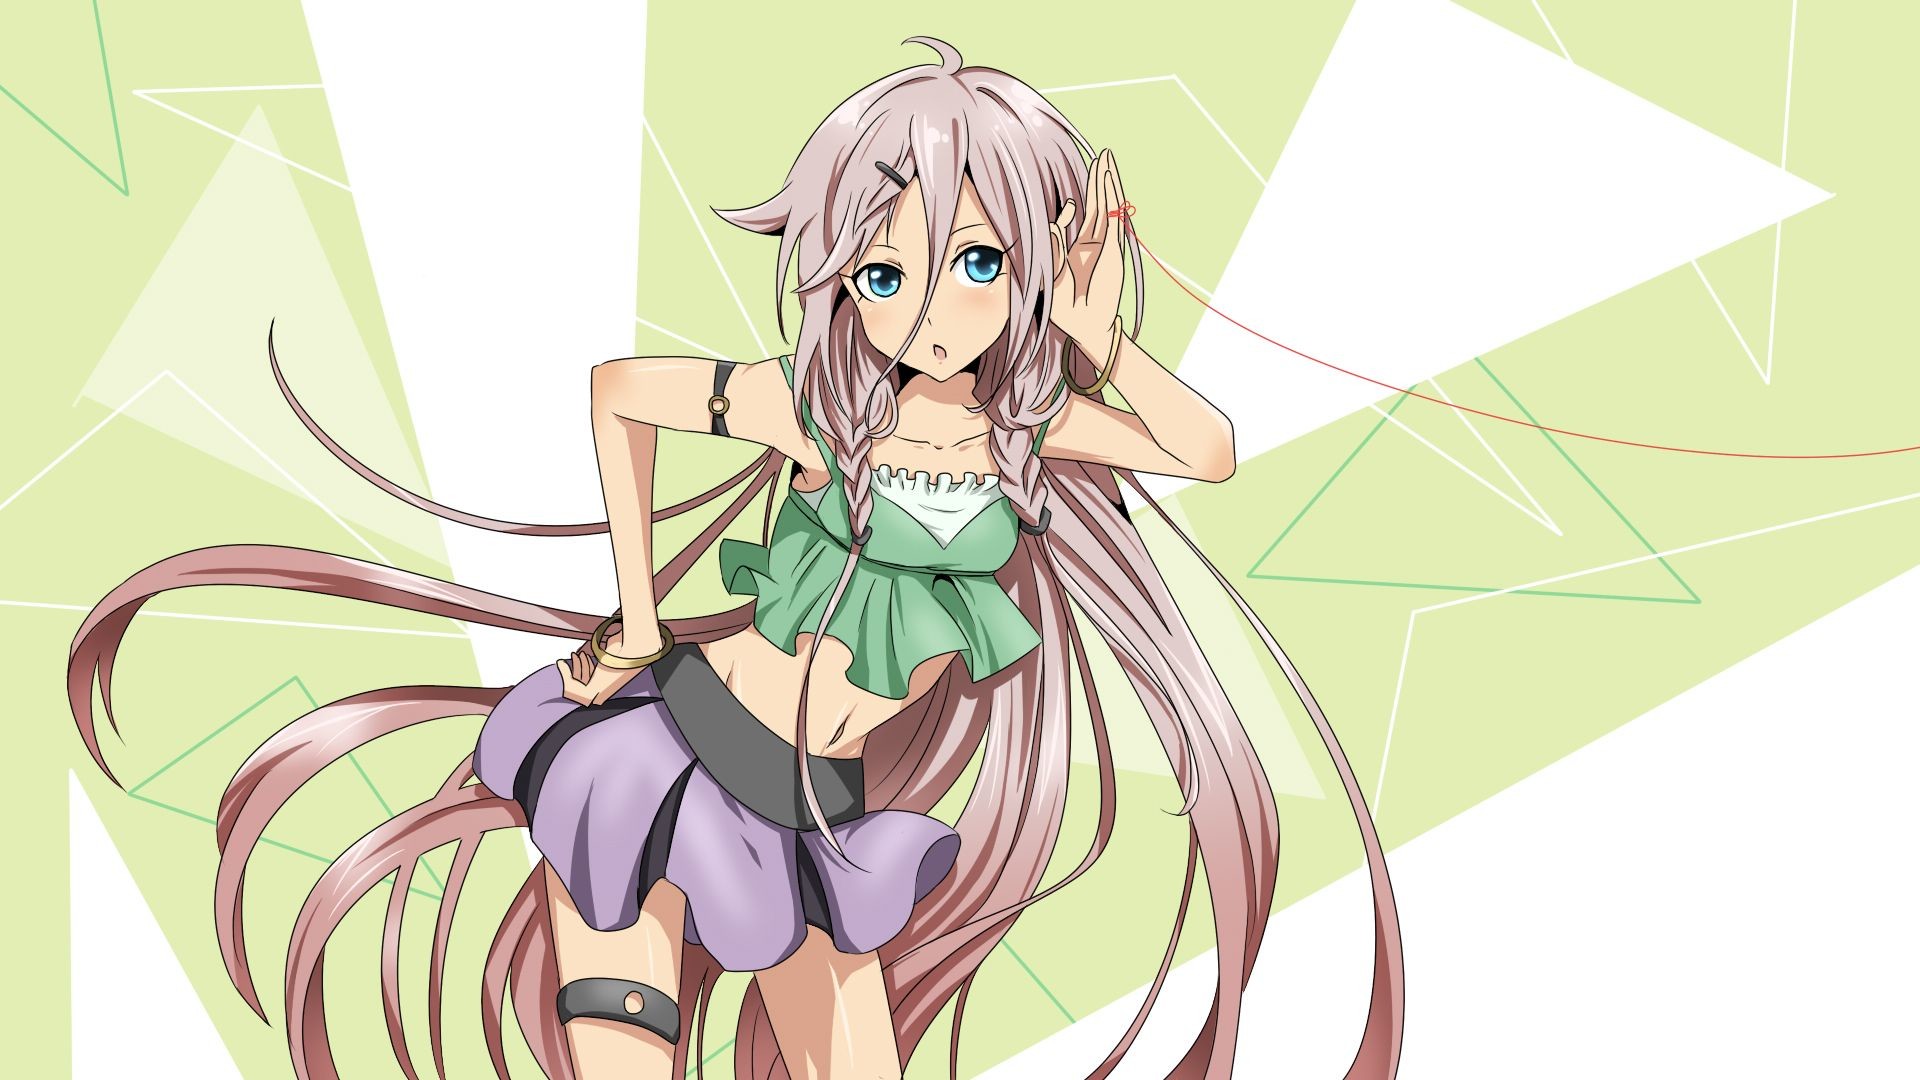 1920x1080 Download hd wallpapers of 330-Vocaloid, IA (Vocaloid), Sexy Anime. Free  download High Quality and Widescreen Resolutions Desktop Background Images.